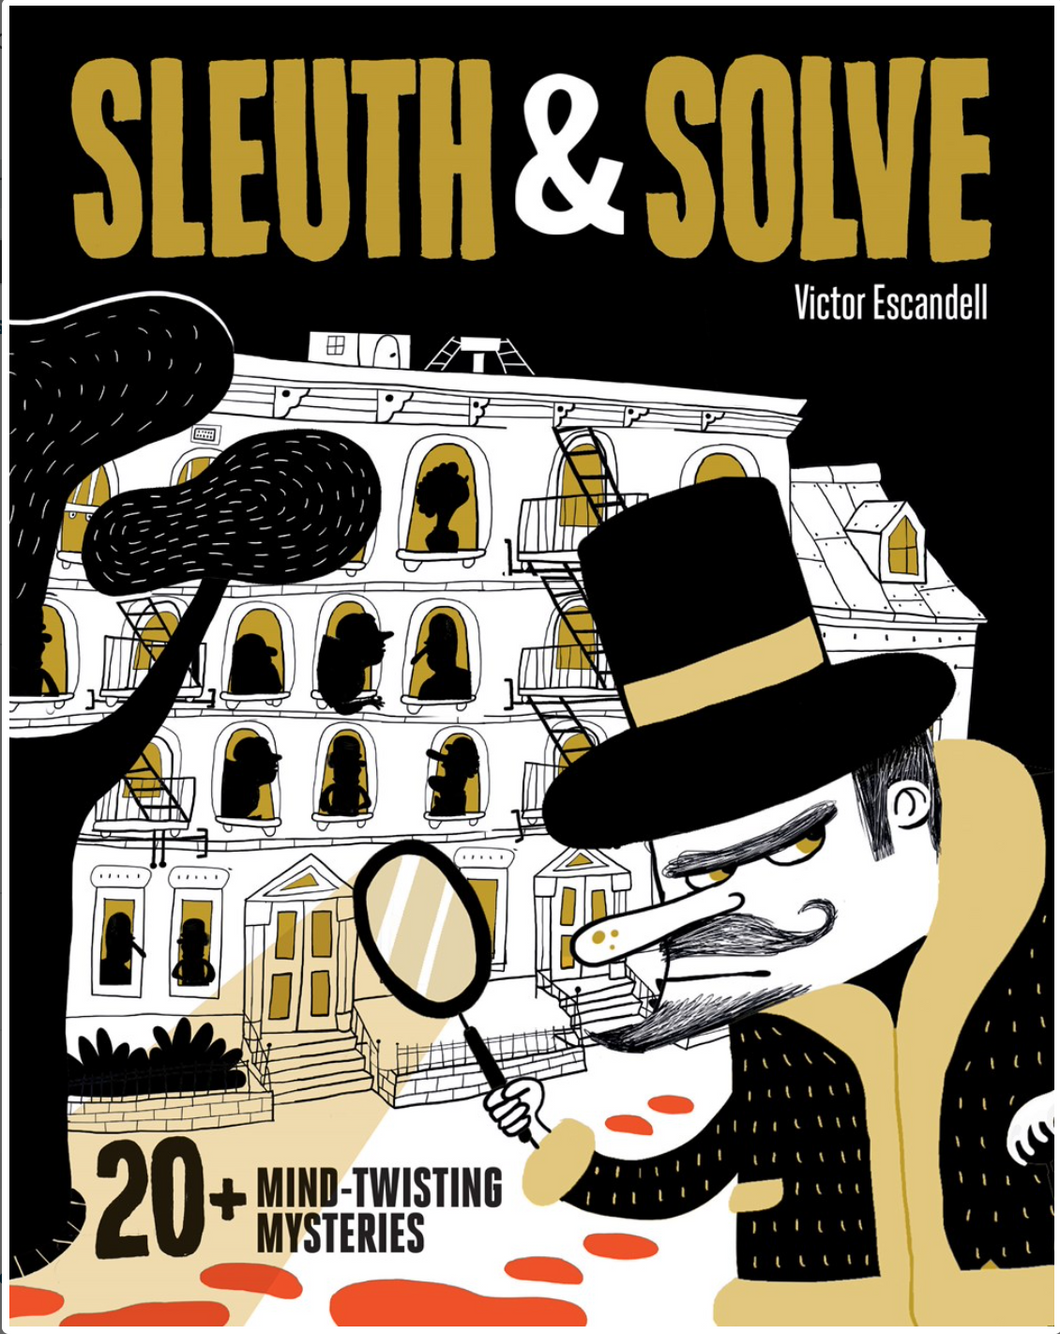 Sleuth & Solve 20+ Mind-Twisting Mysteries